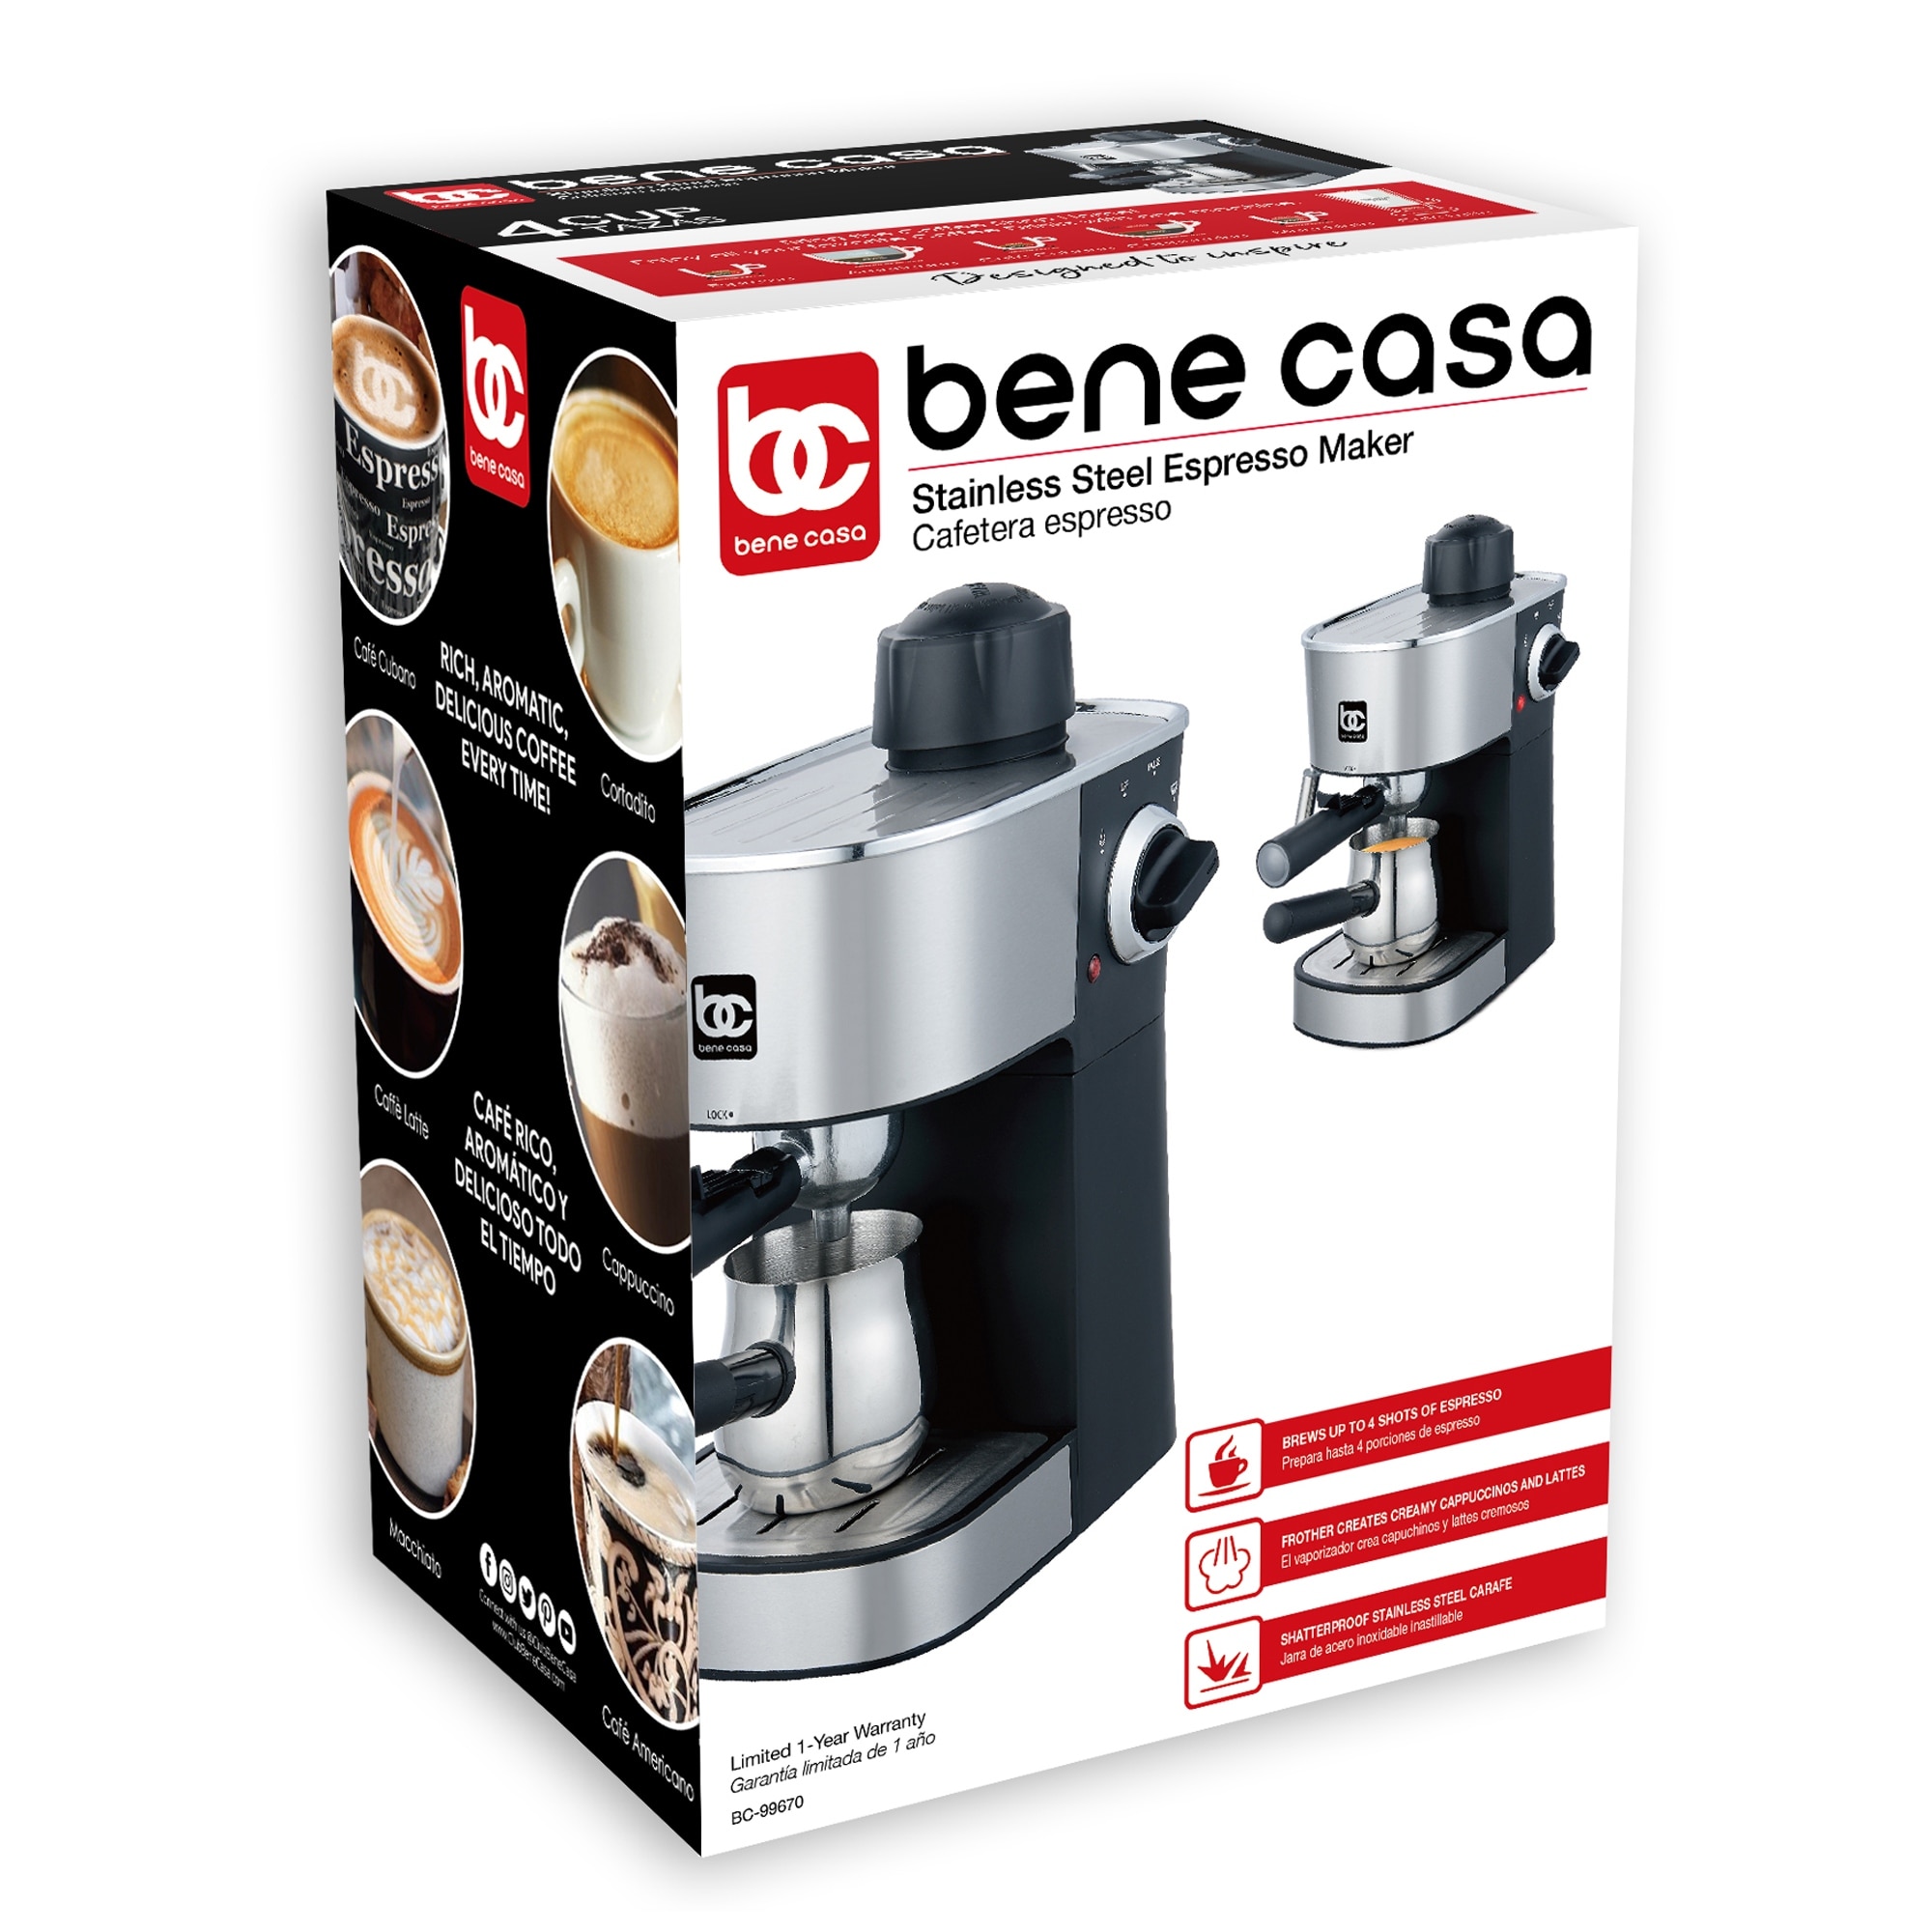 https://ak1.ostkcdn.com/images/products/is/images/direct/209fefd0e92a2dc7fd47b0cff38e18d5d0b2bc03/Bene-Casa-4-cup-stainless-steel-espresso-maker-with-steam-frother-function%2C-cappuccino-maker%2C.jpg